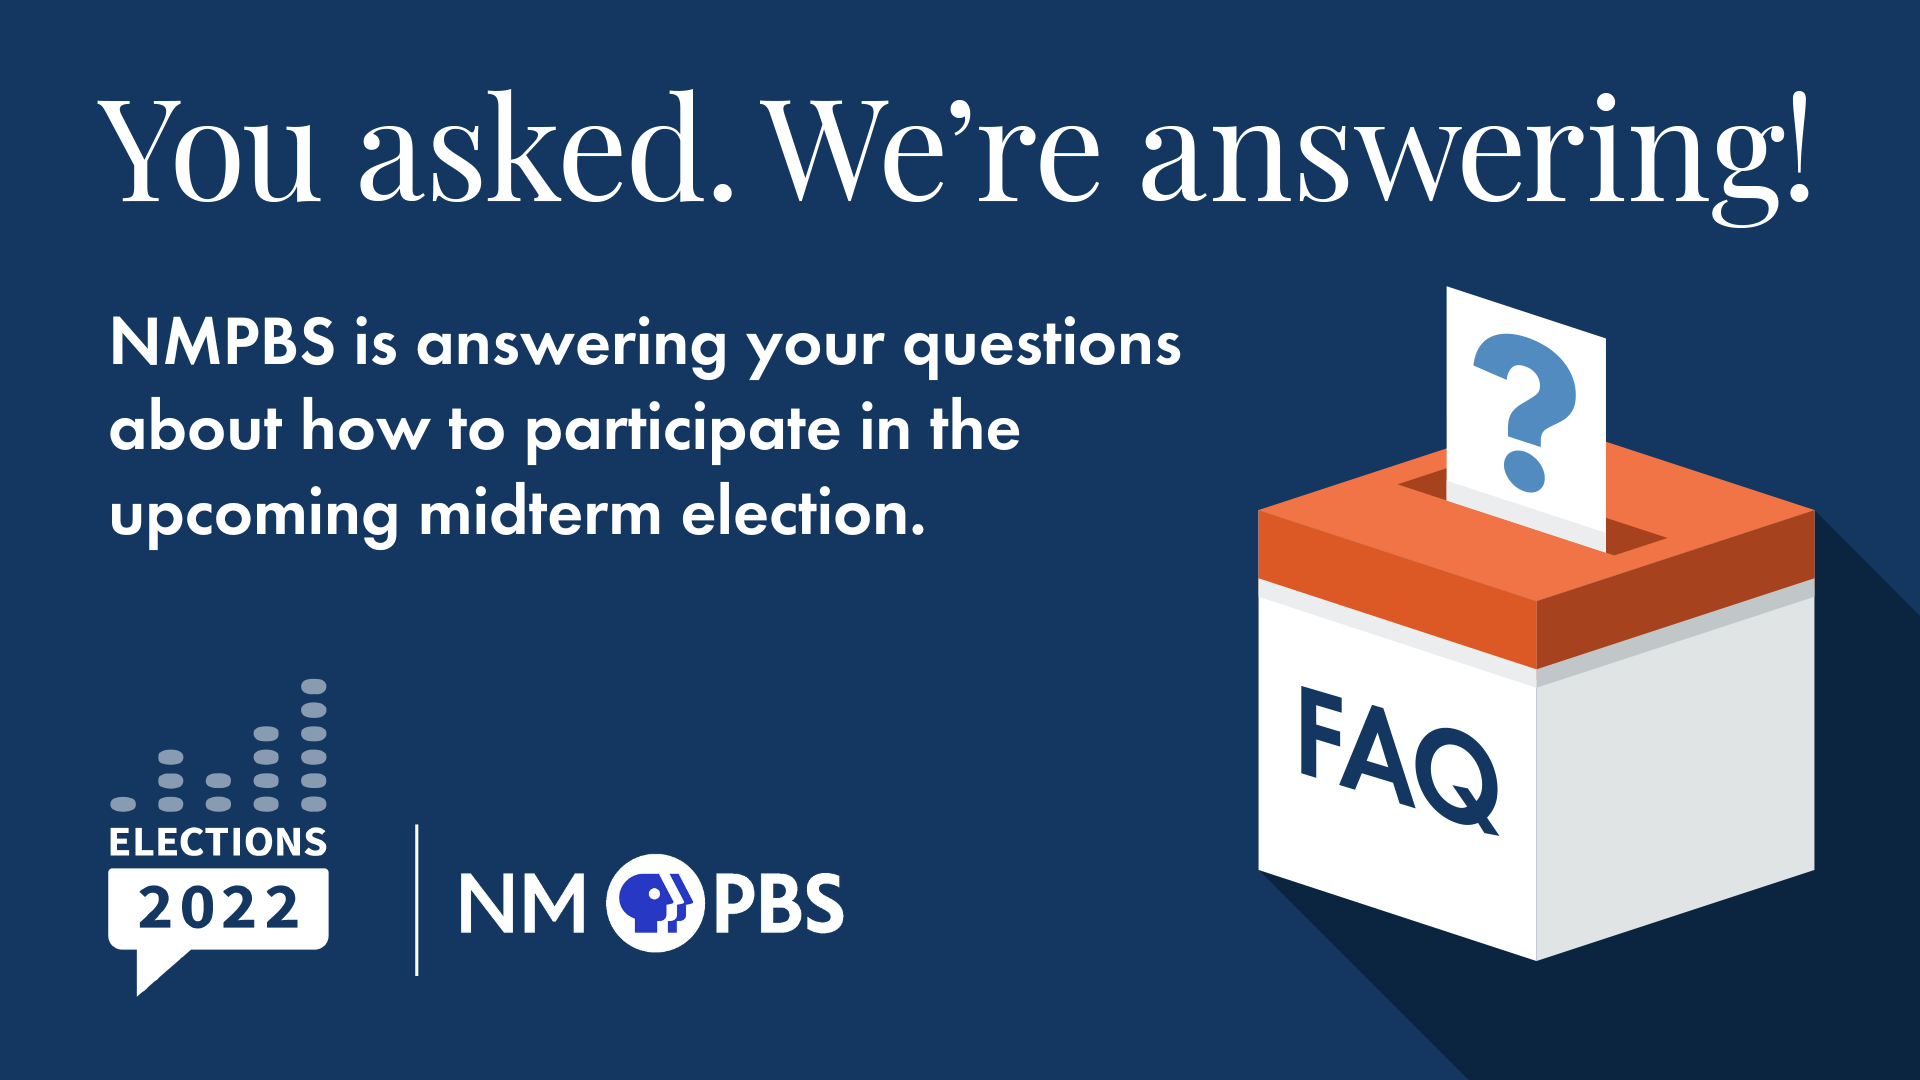 You asked. We're answering! Graphic about answering questions related to the election.